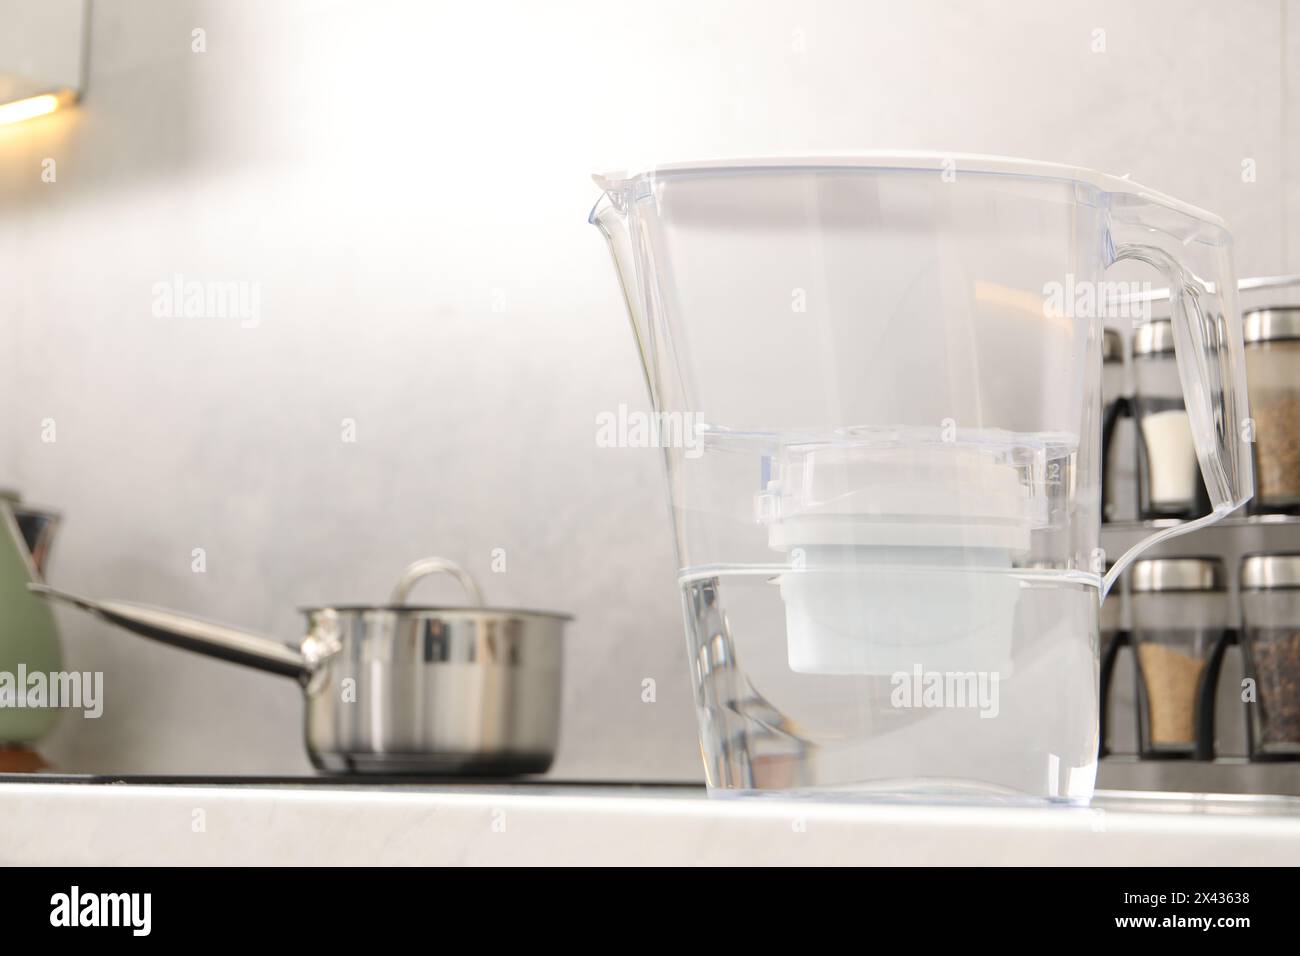 Water filter jug on countertop in kitchen Stock Photo